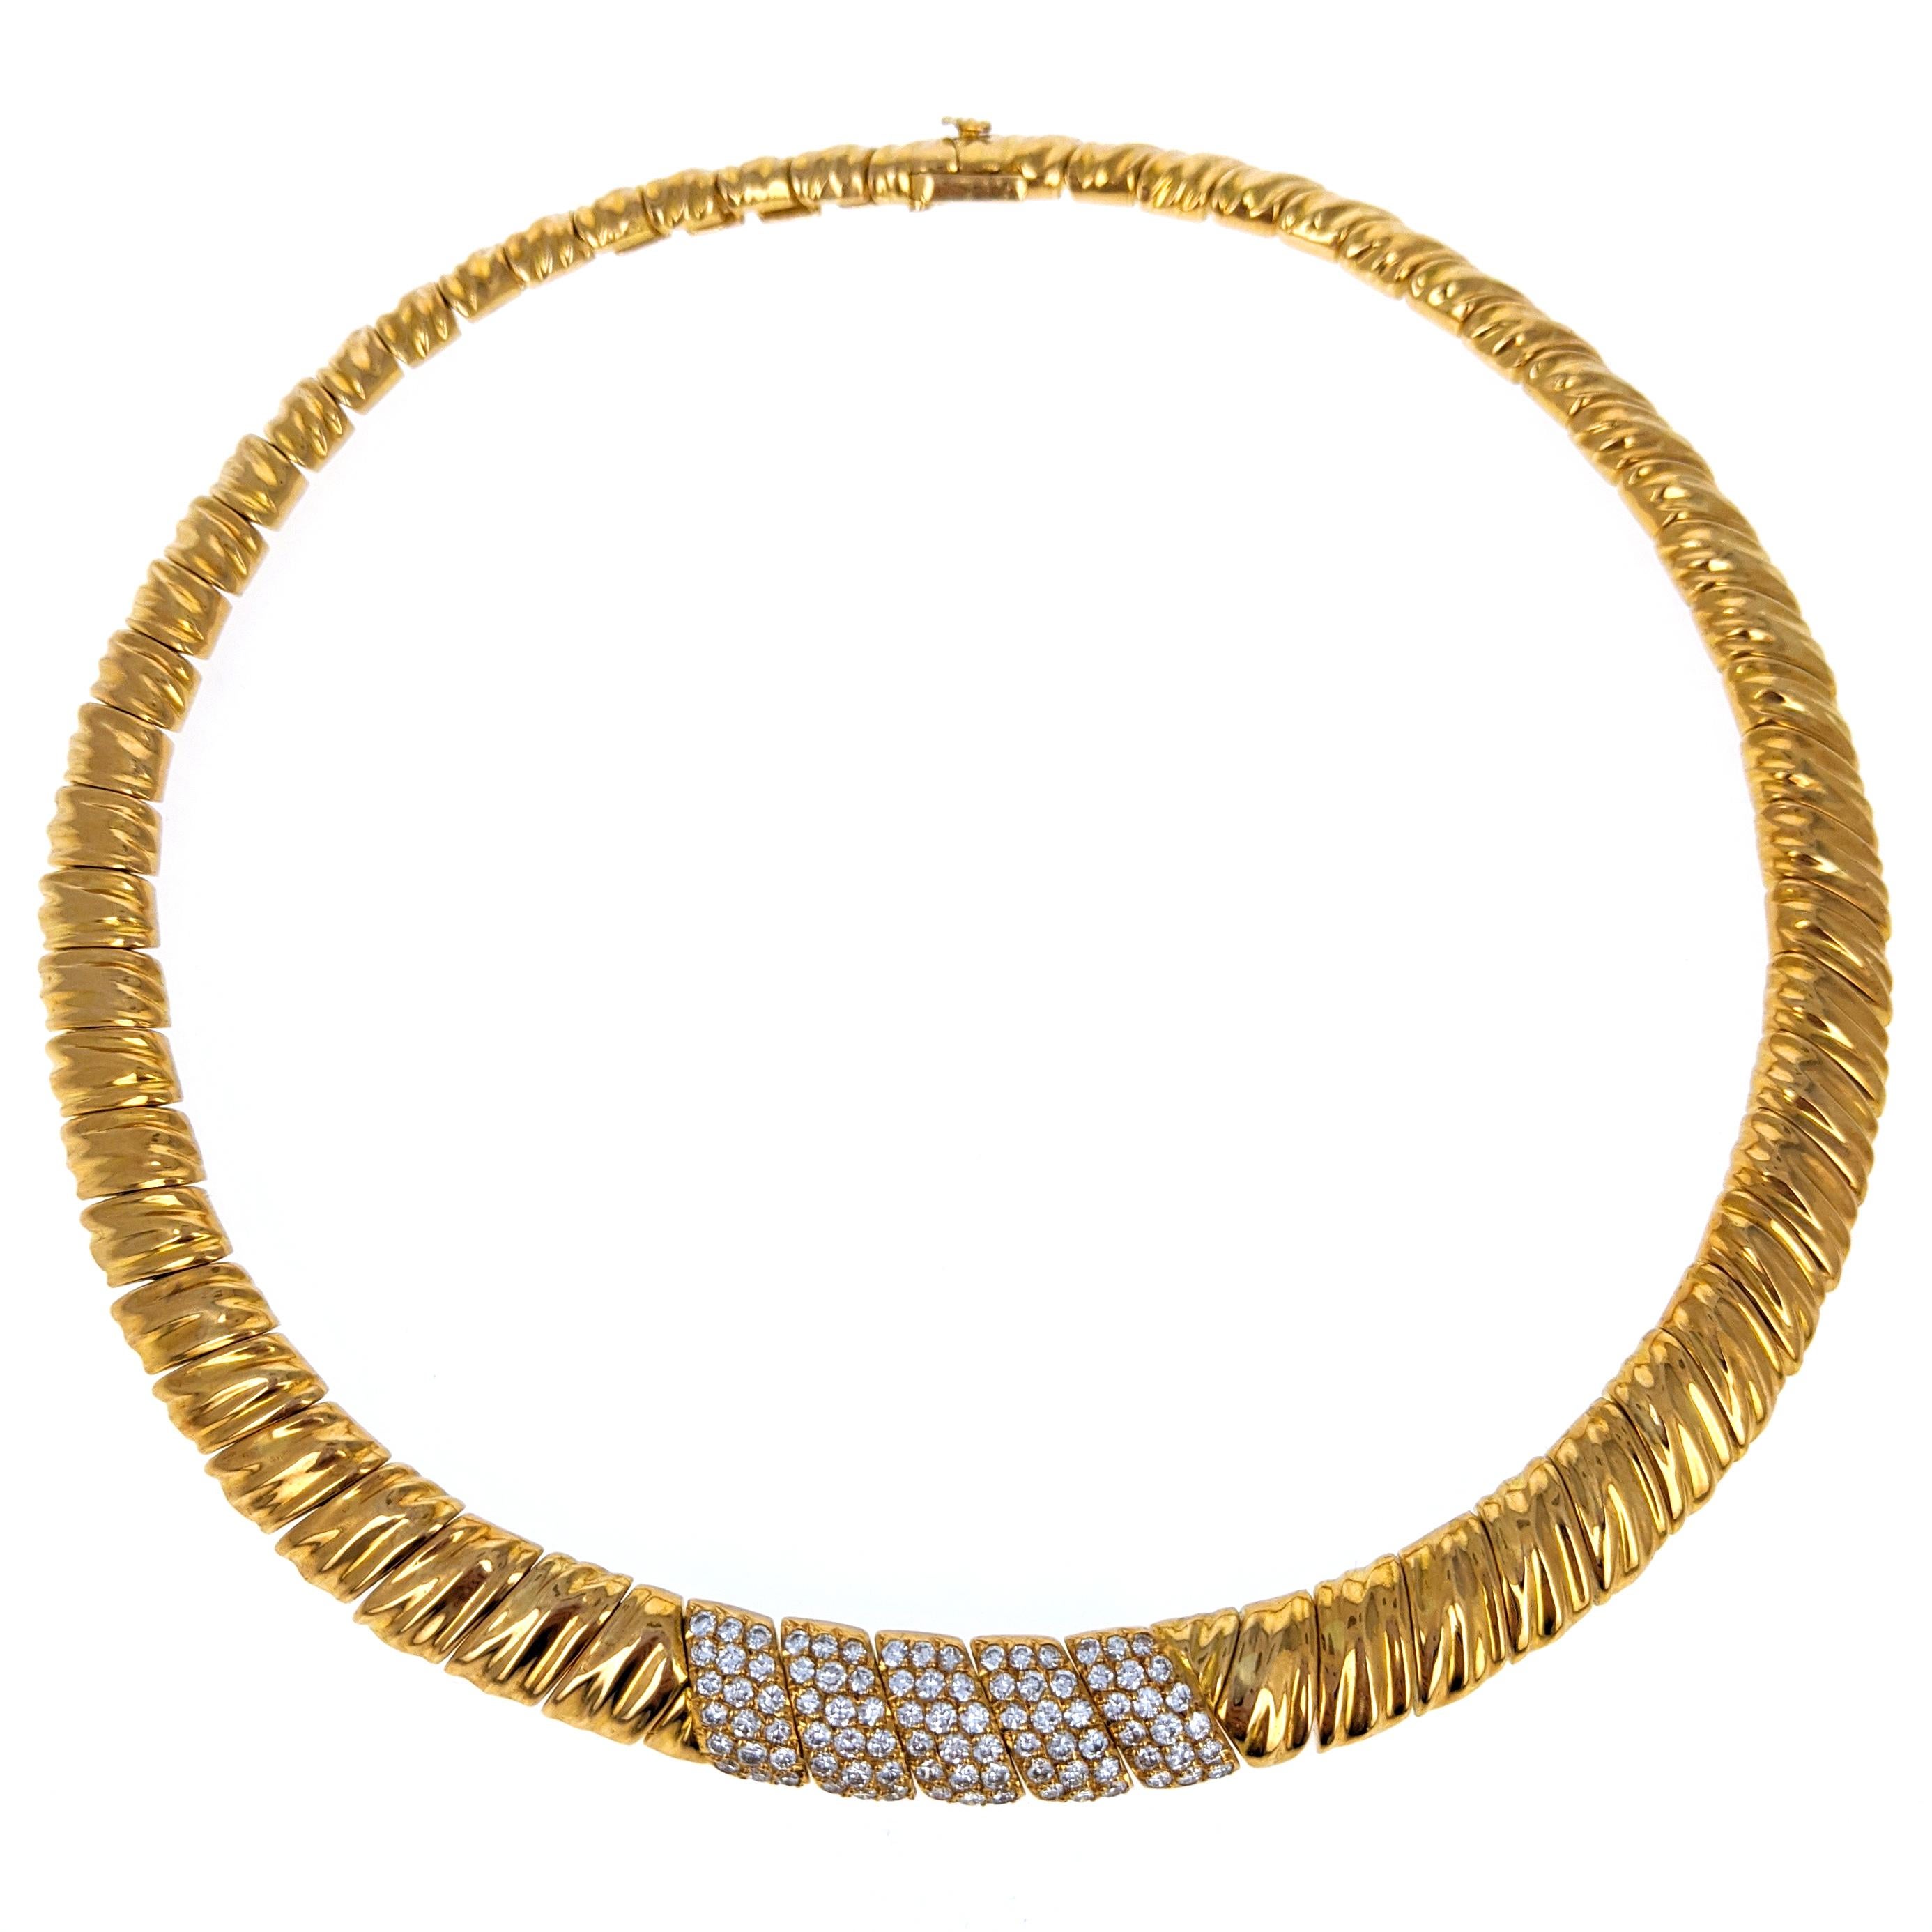 This choker necklace by Van Cleef & Arpels is comprised of 18 karat yellow gold textured links centering upon five pave-set diamond links. The diamonds are VS clarity, G-H color and in total weigh approximately 1.8 carats. The necklace has a box